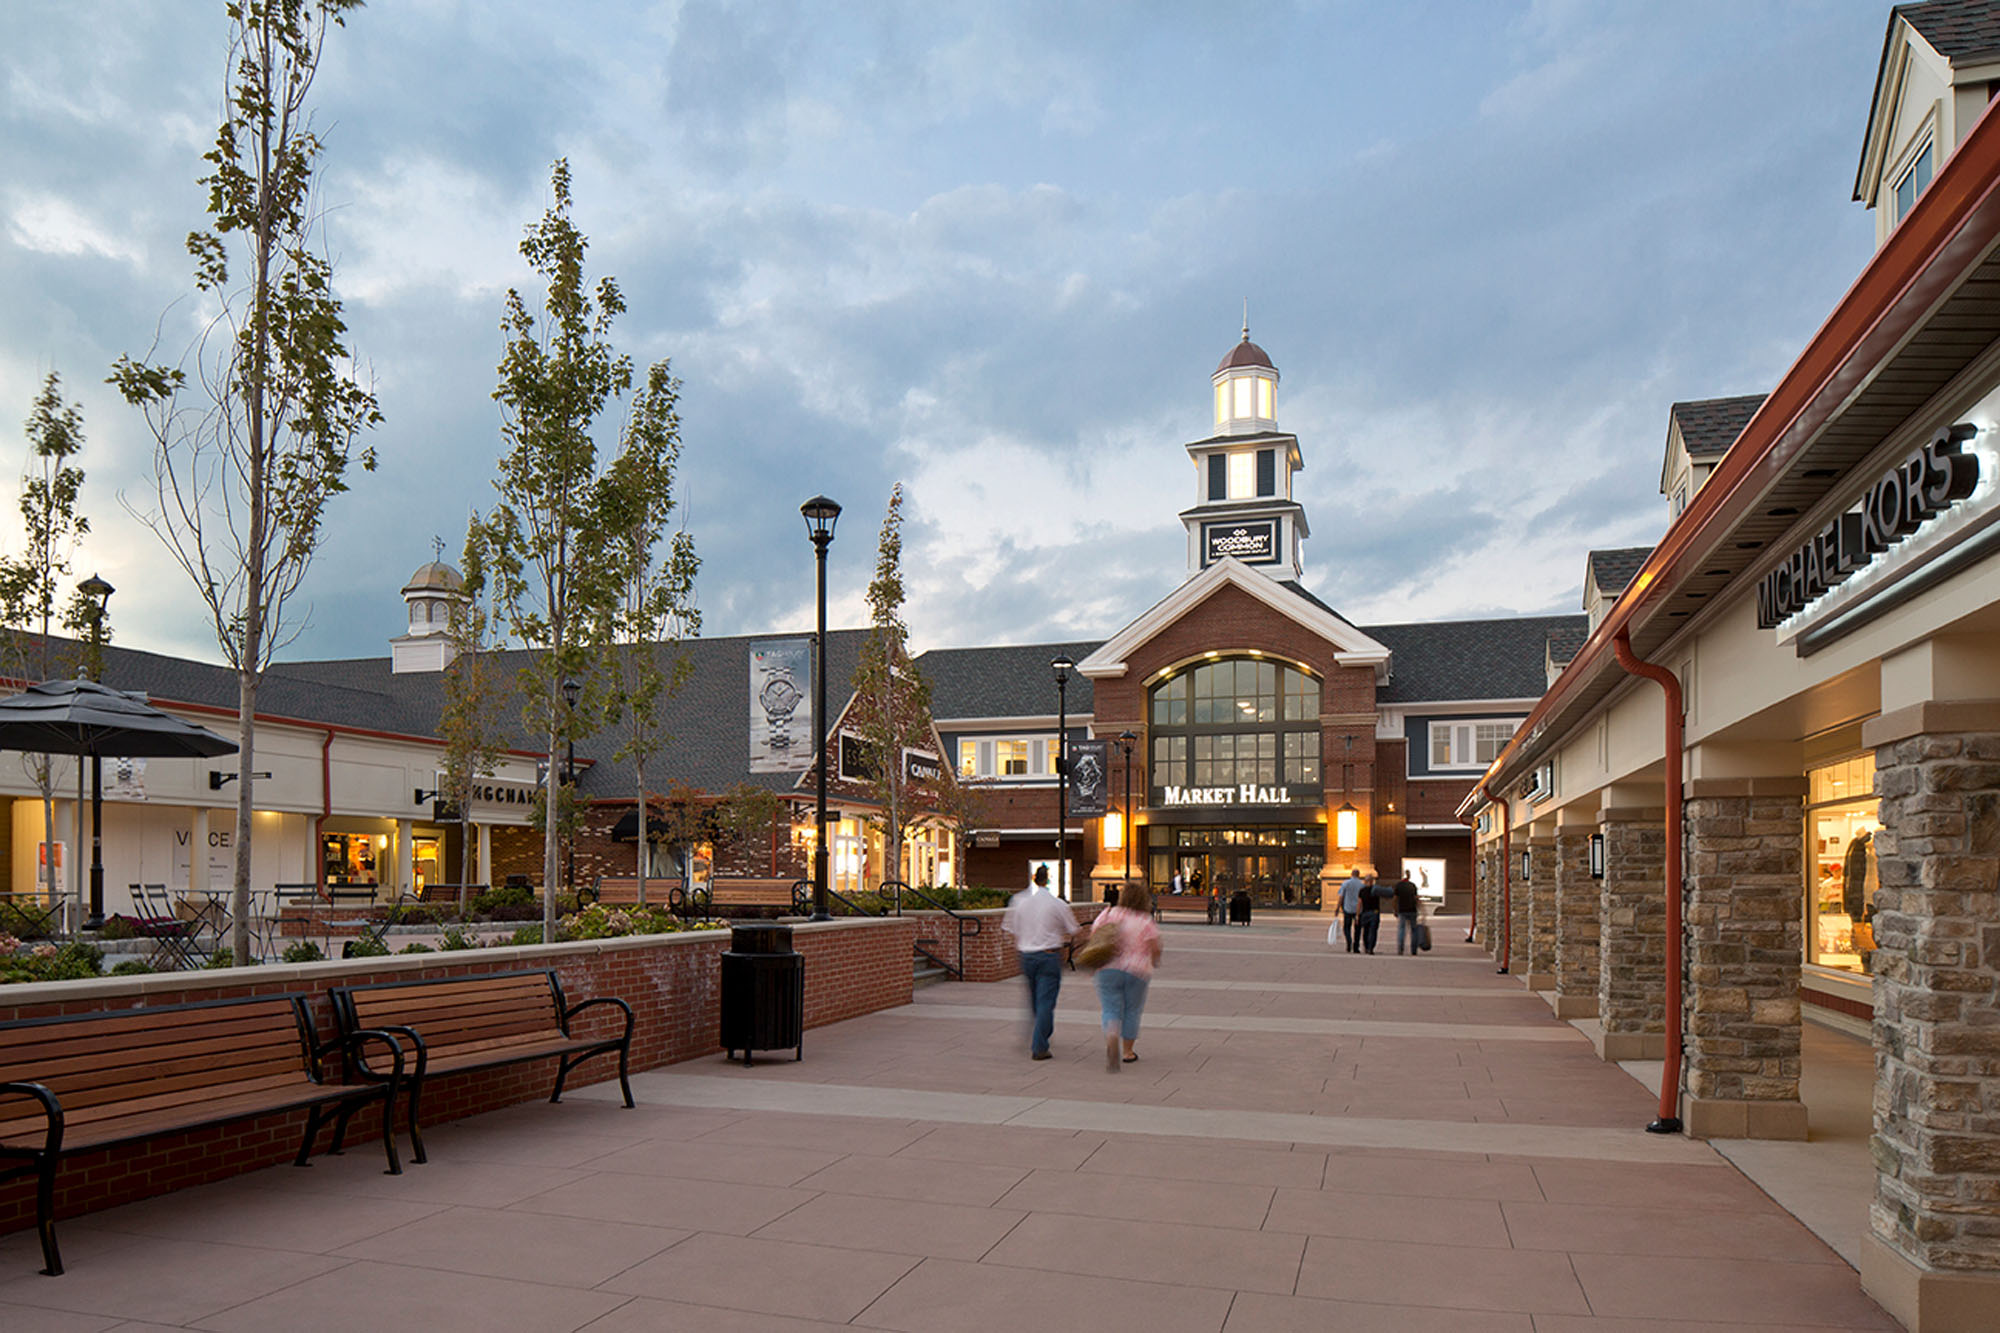 Store Panorama in Woodbury Common Premium Outlet Mall Editorial Stock Image  - Image of company, building: 117102154